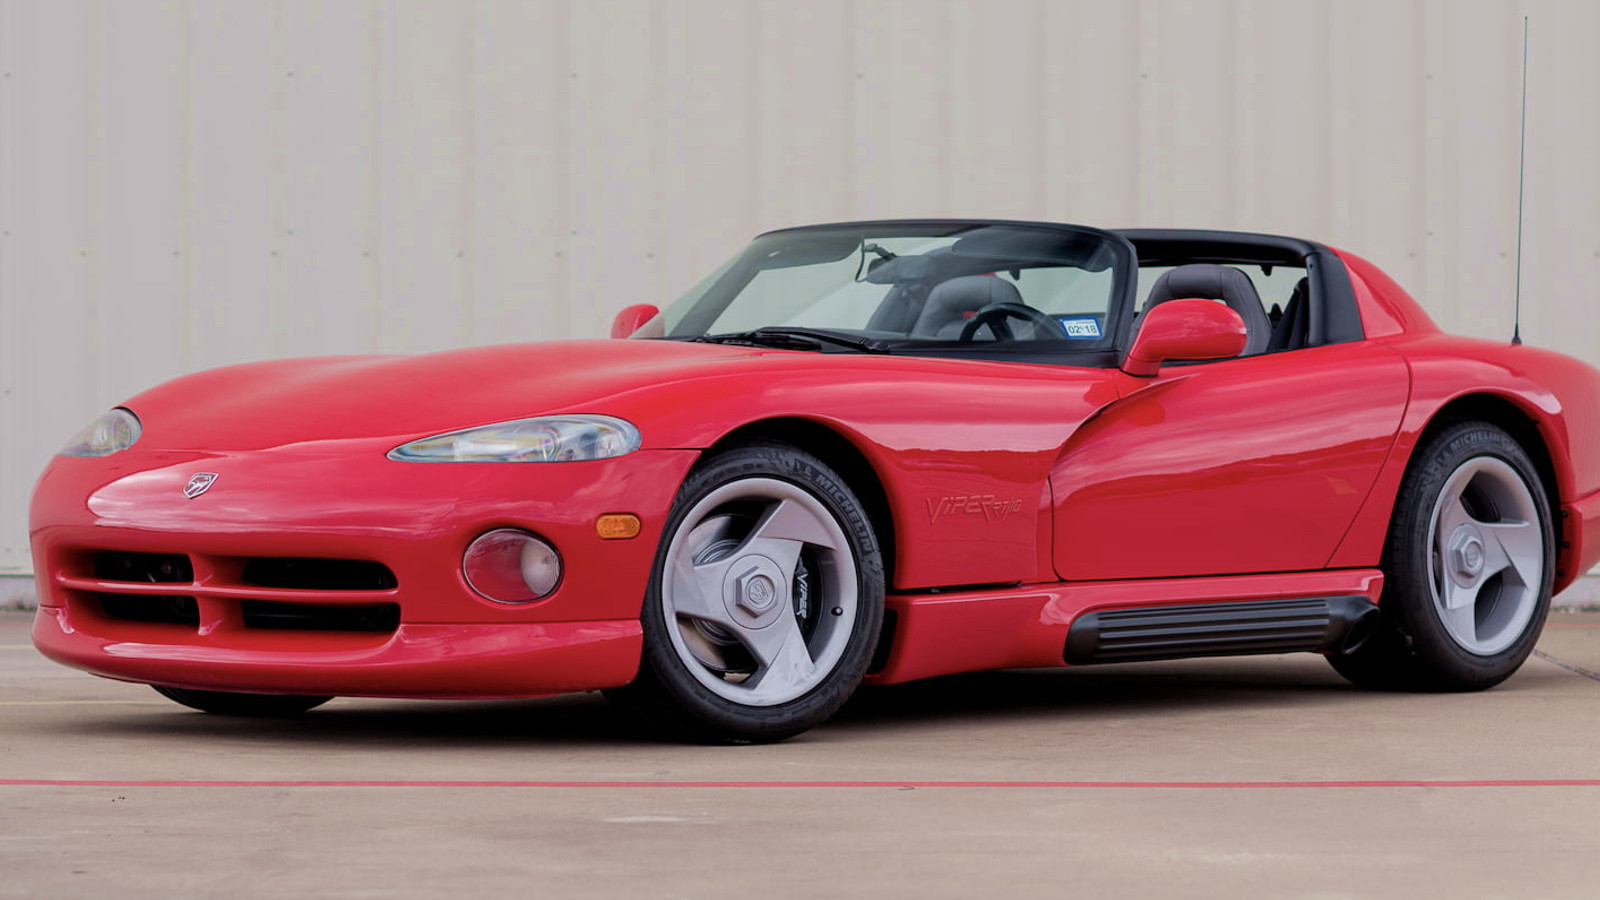 9 Vipers up for grabs at Mecum’s Houston auction